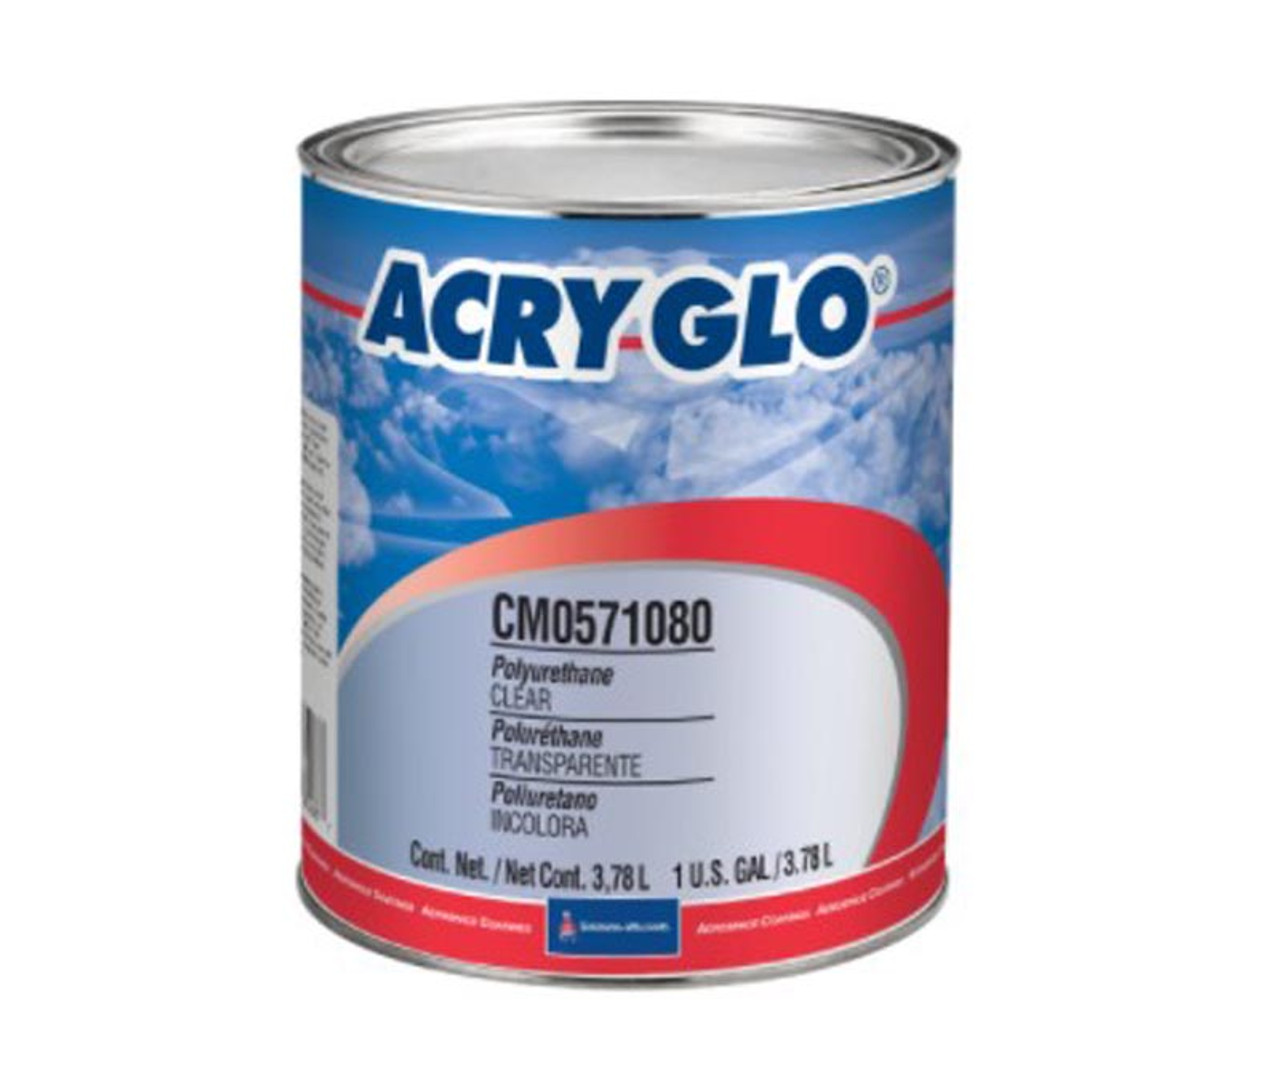 Sherwin-Williams CM0571080 ACRY GLO Clear Coat High-Solids Acrylic Urethane  Paint - Gallon Can at